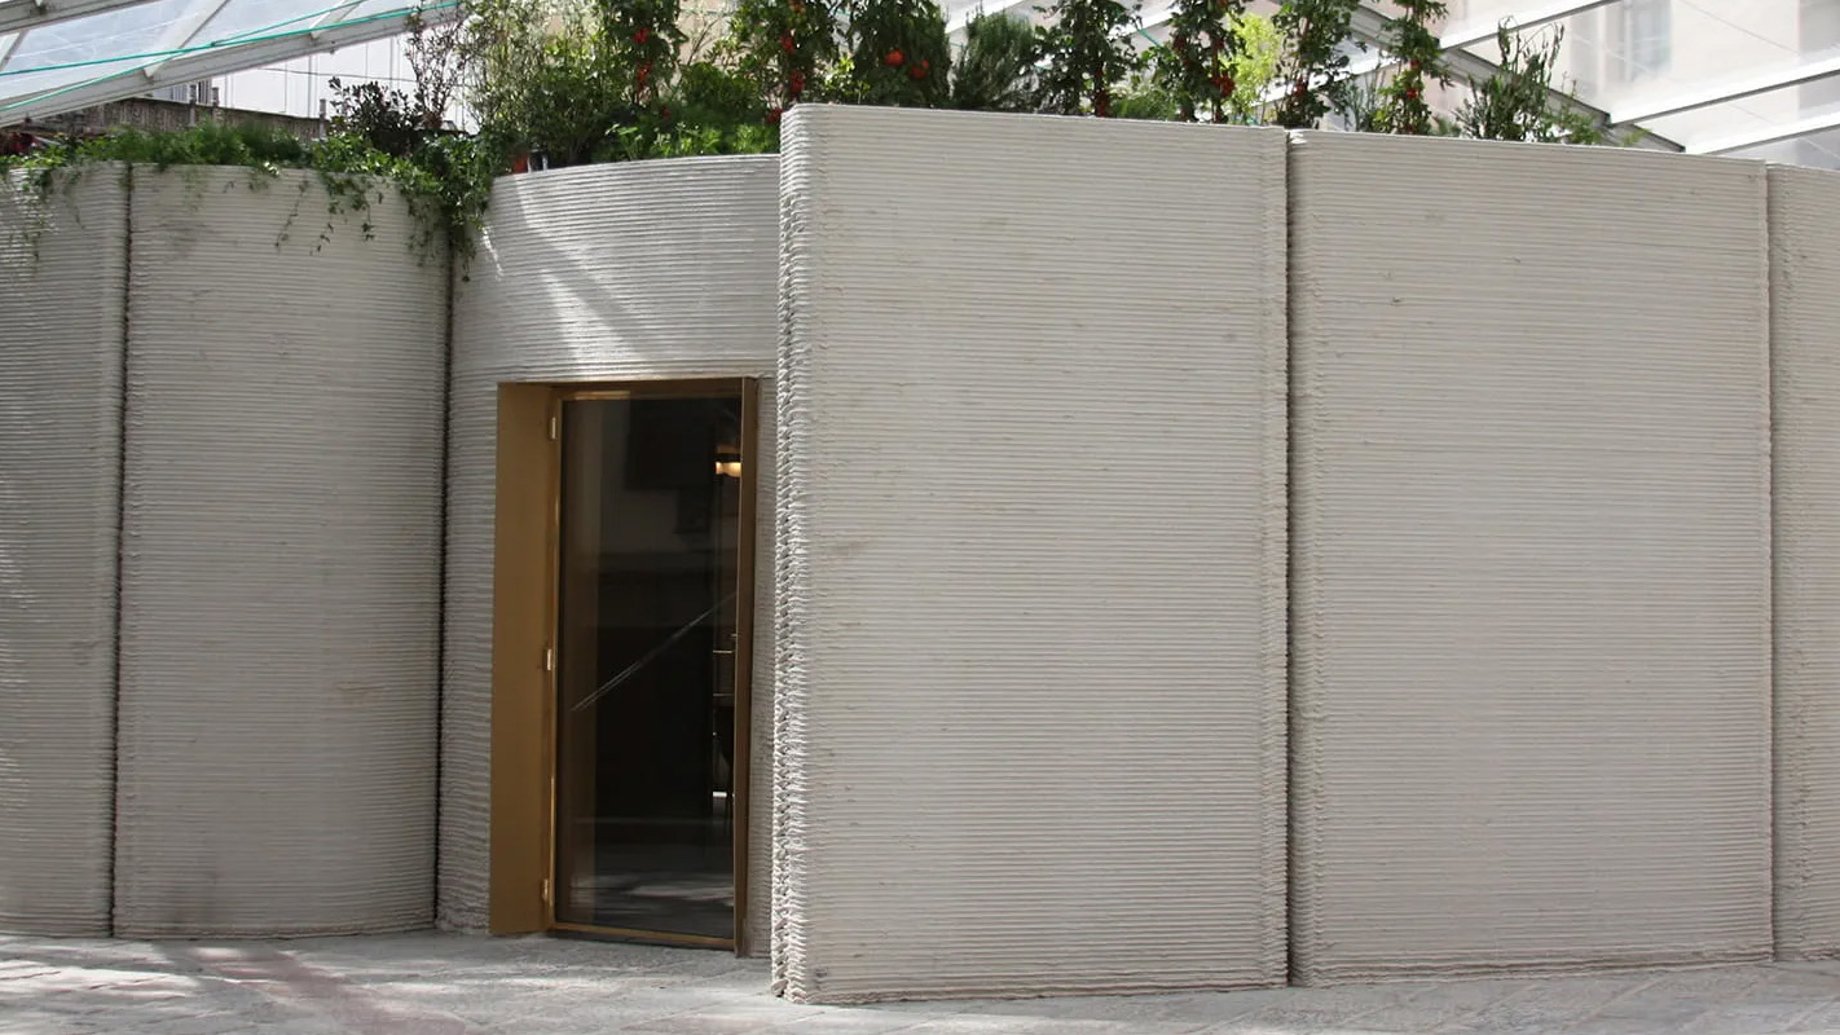 Exterior view of a 3D printed concrete house